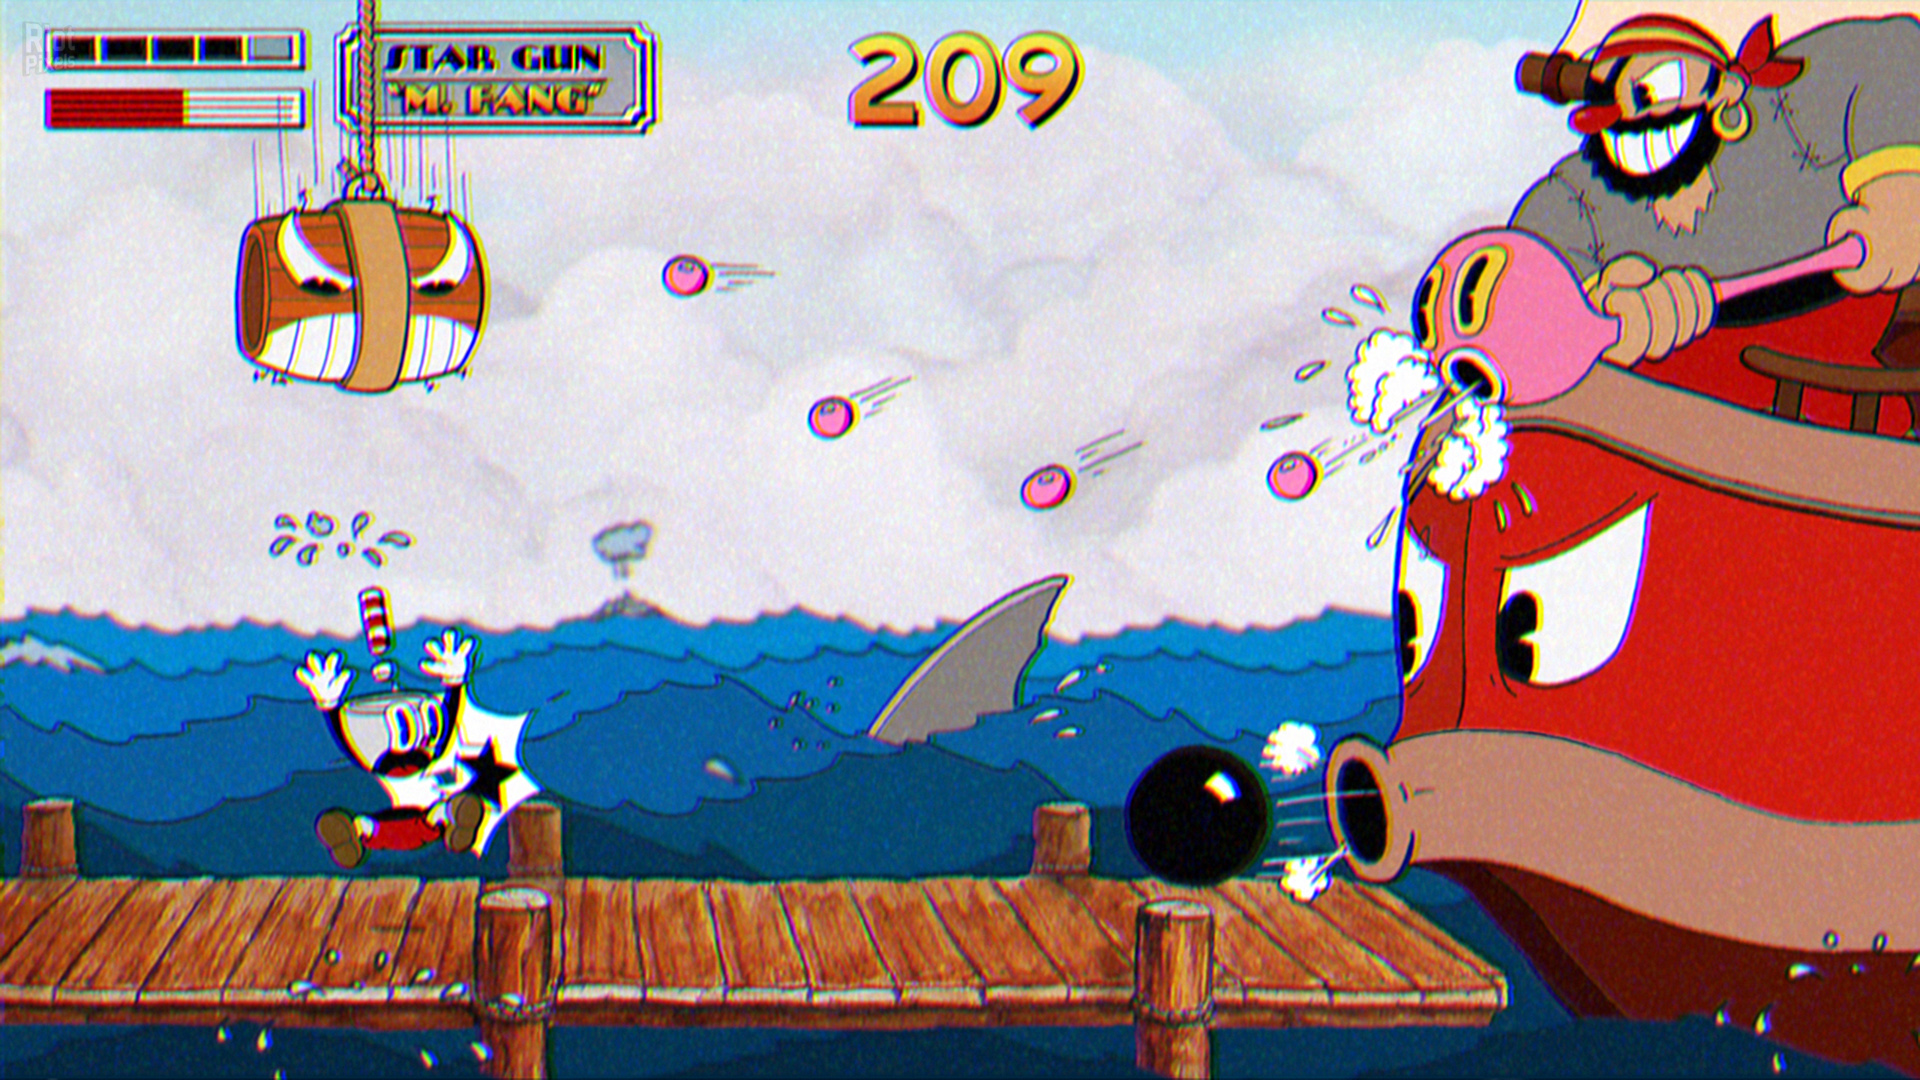 cuphead free download full version for pc